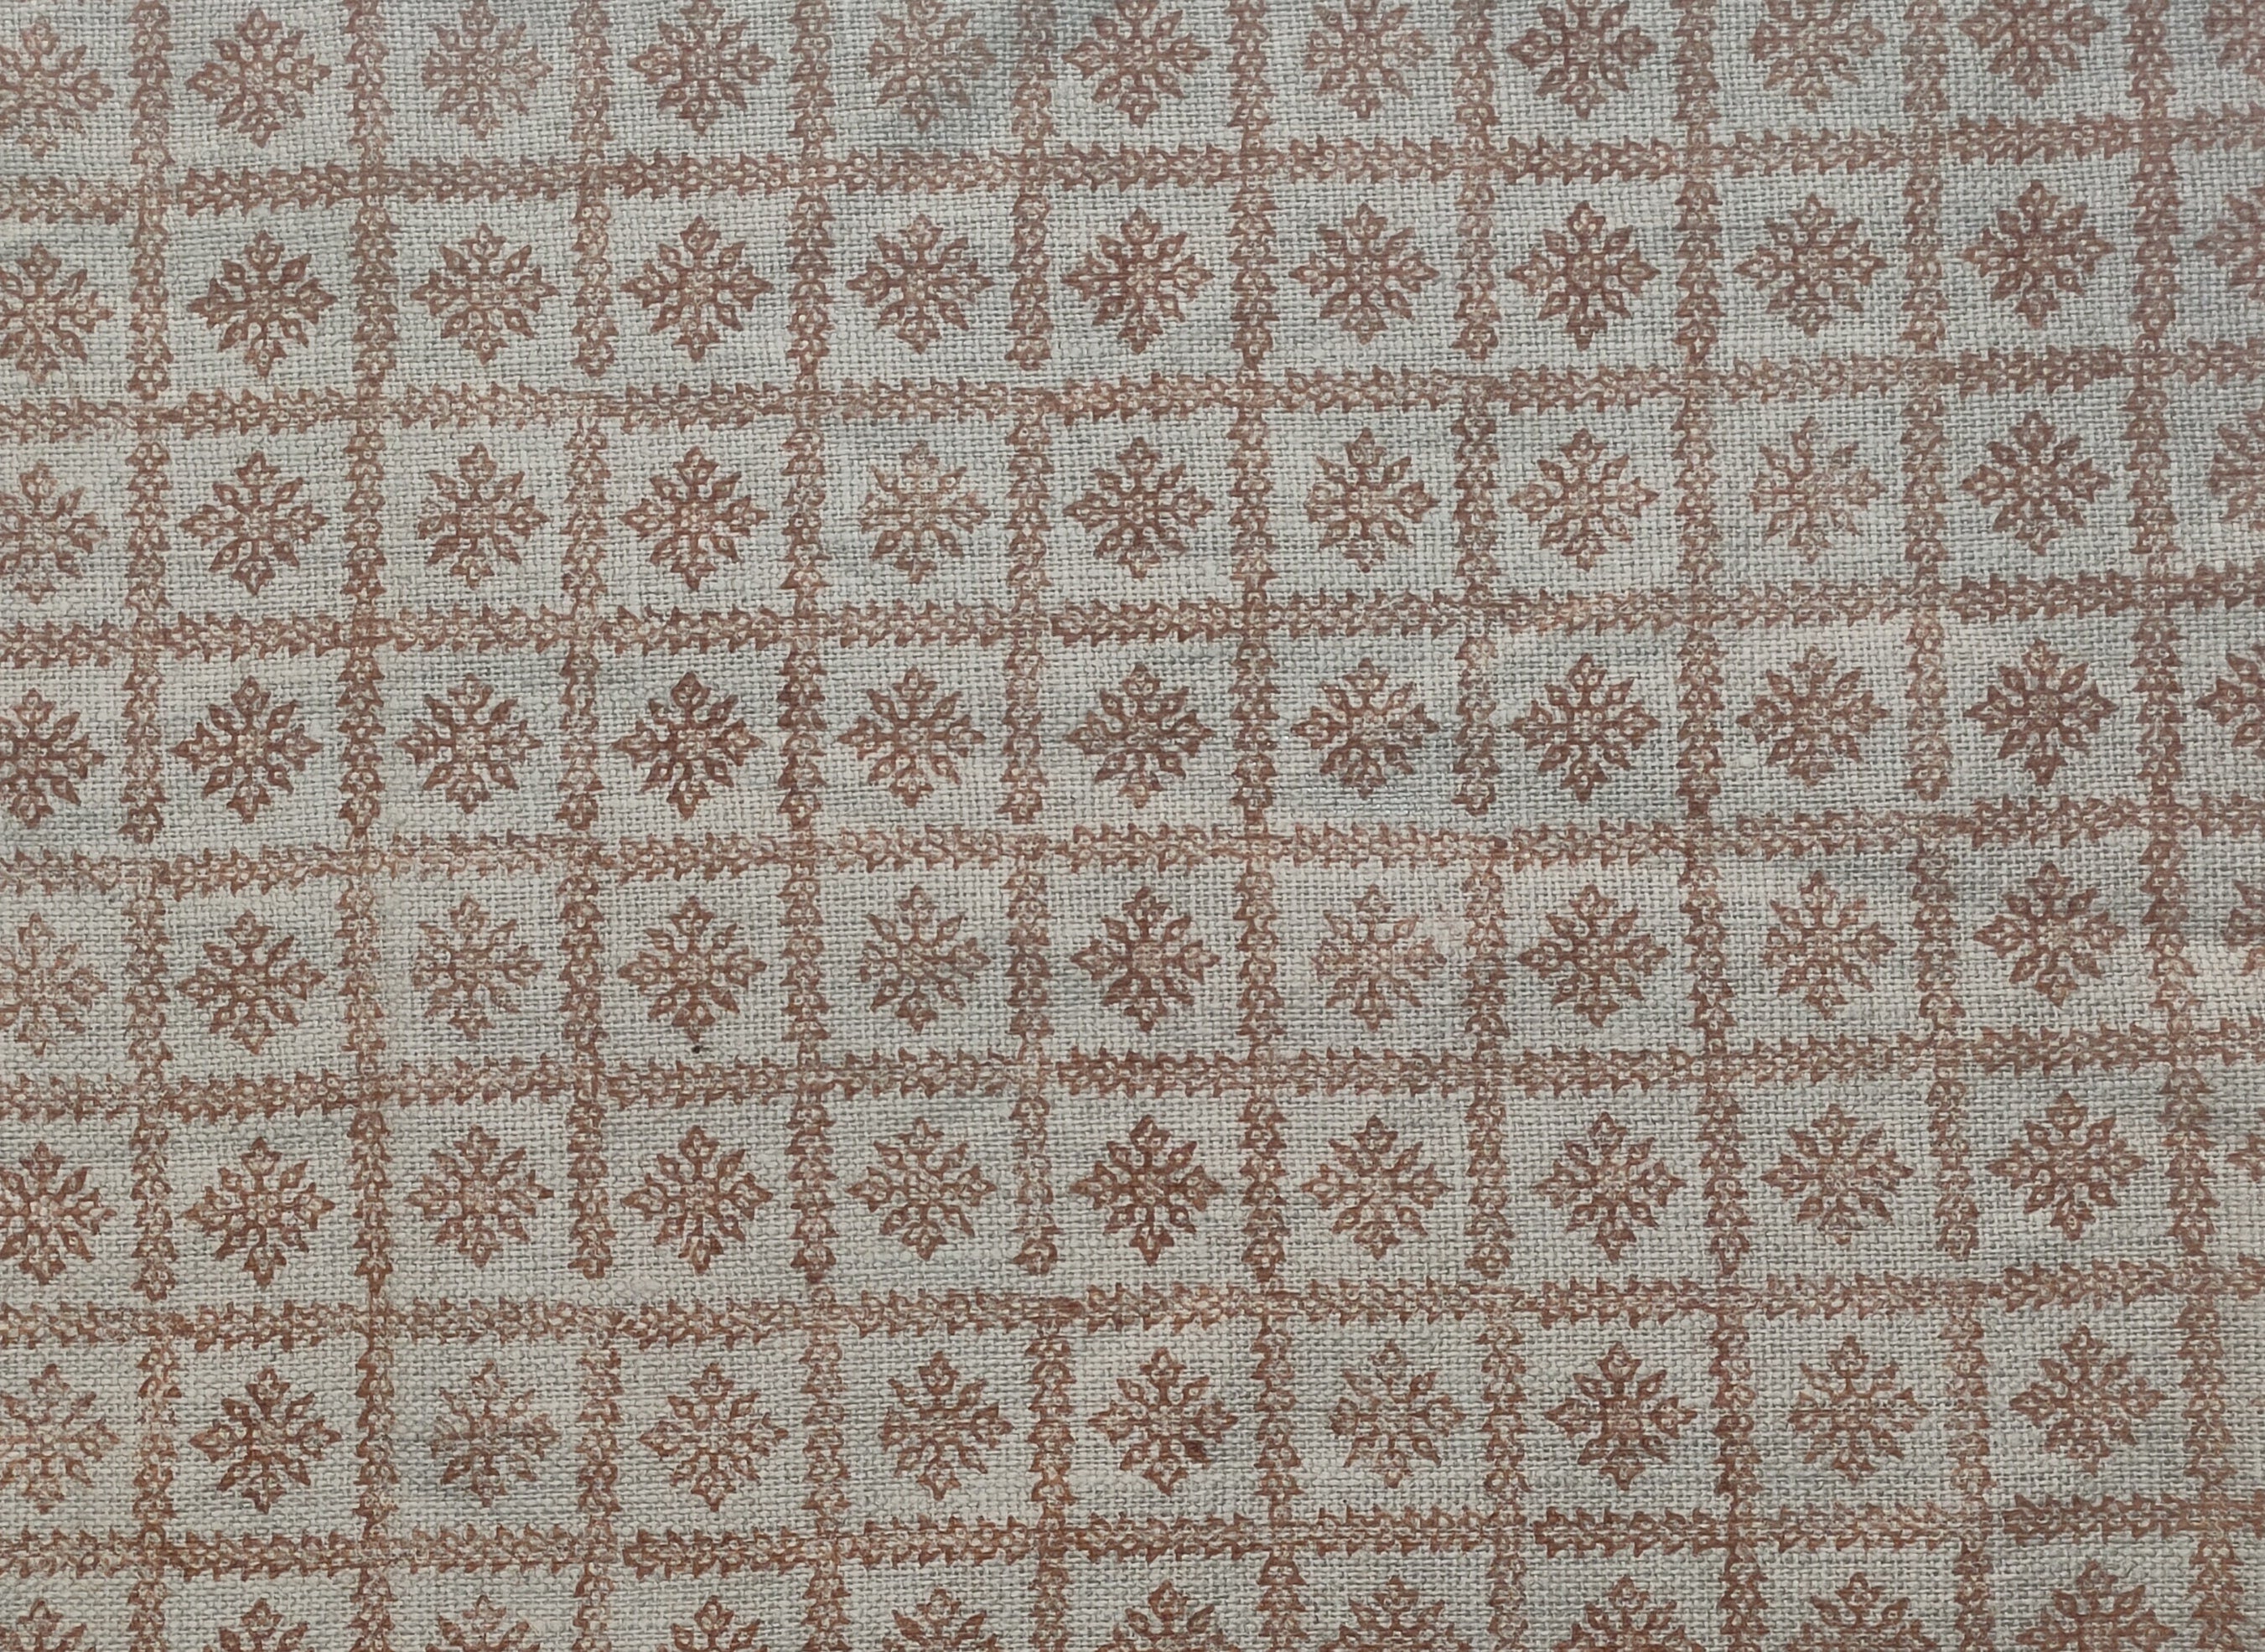 Chopad  Indian Floral Hand Block Printed 100% Linen Cloth, Fabric By The Yard, Fabric For Curtains Pillows Fabric